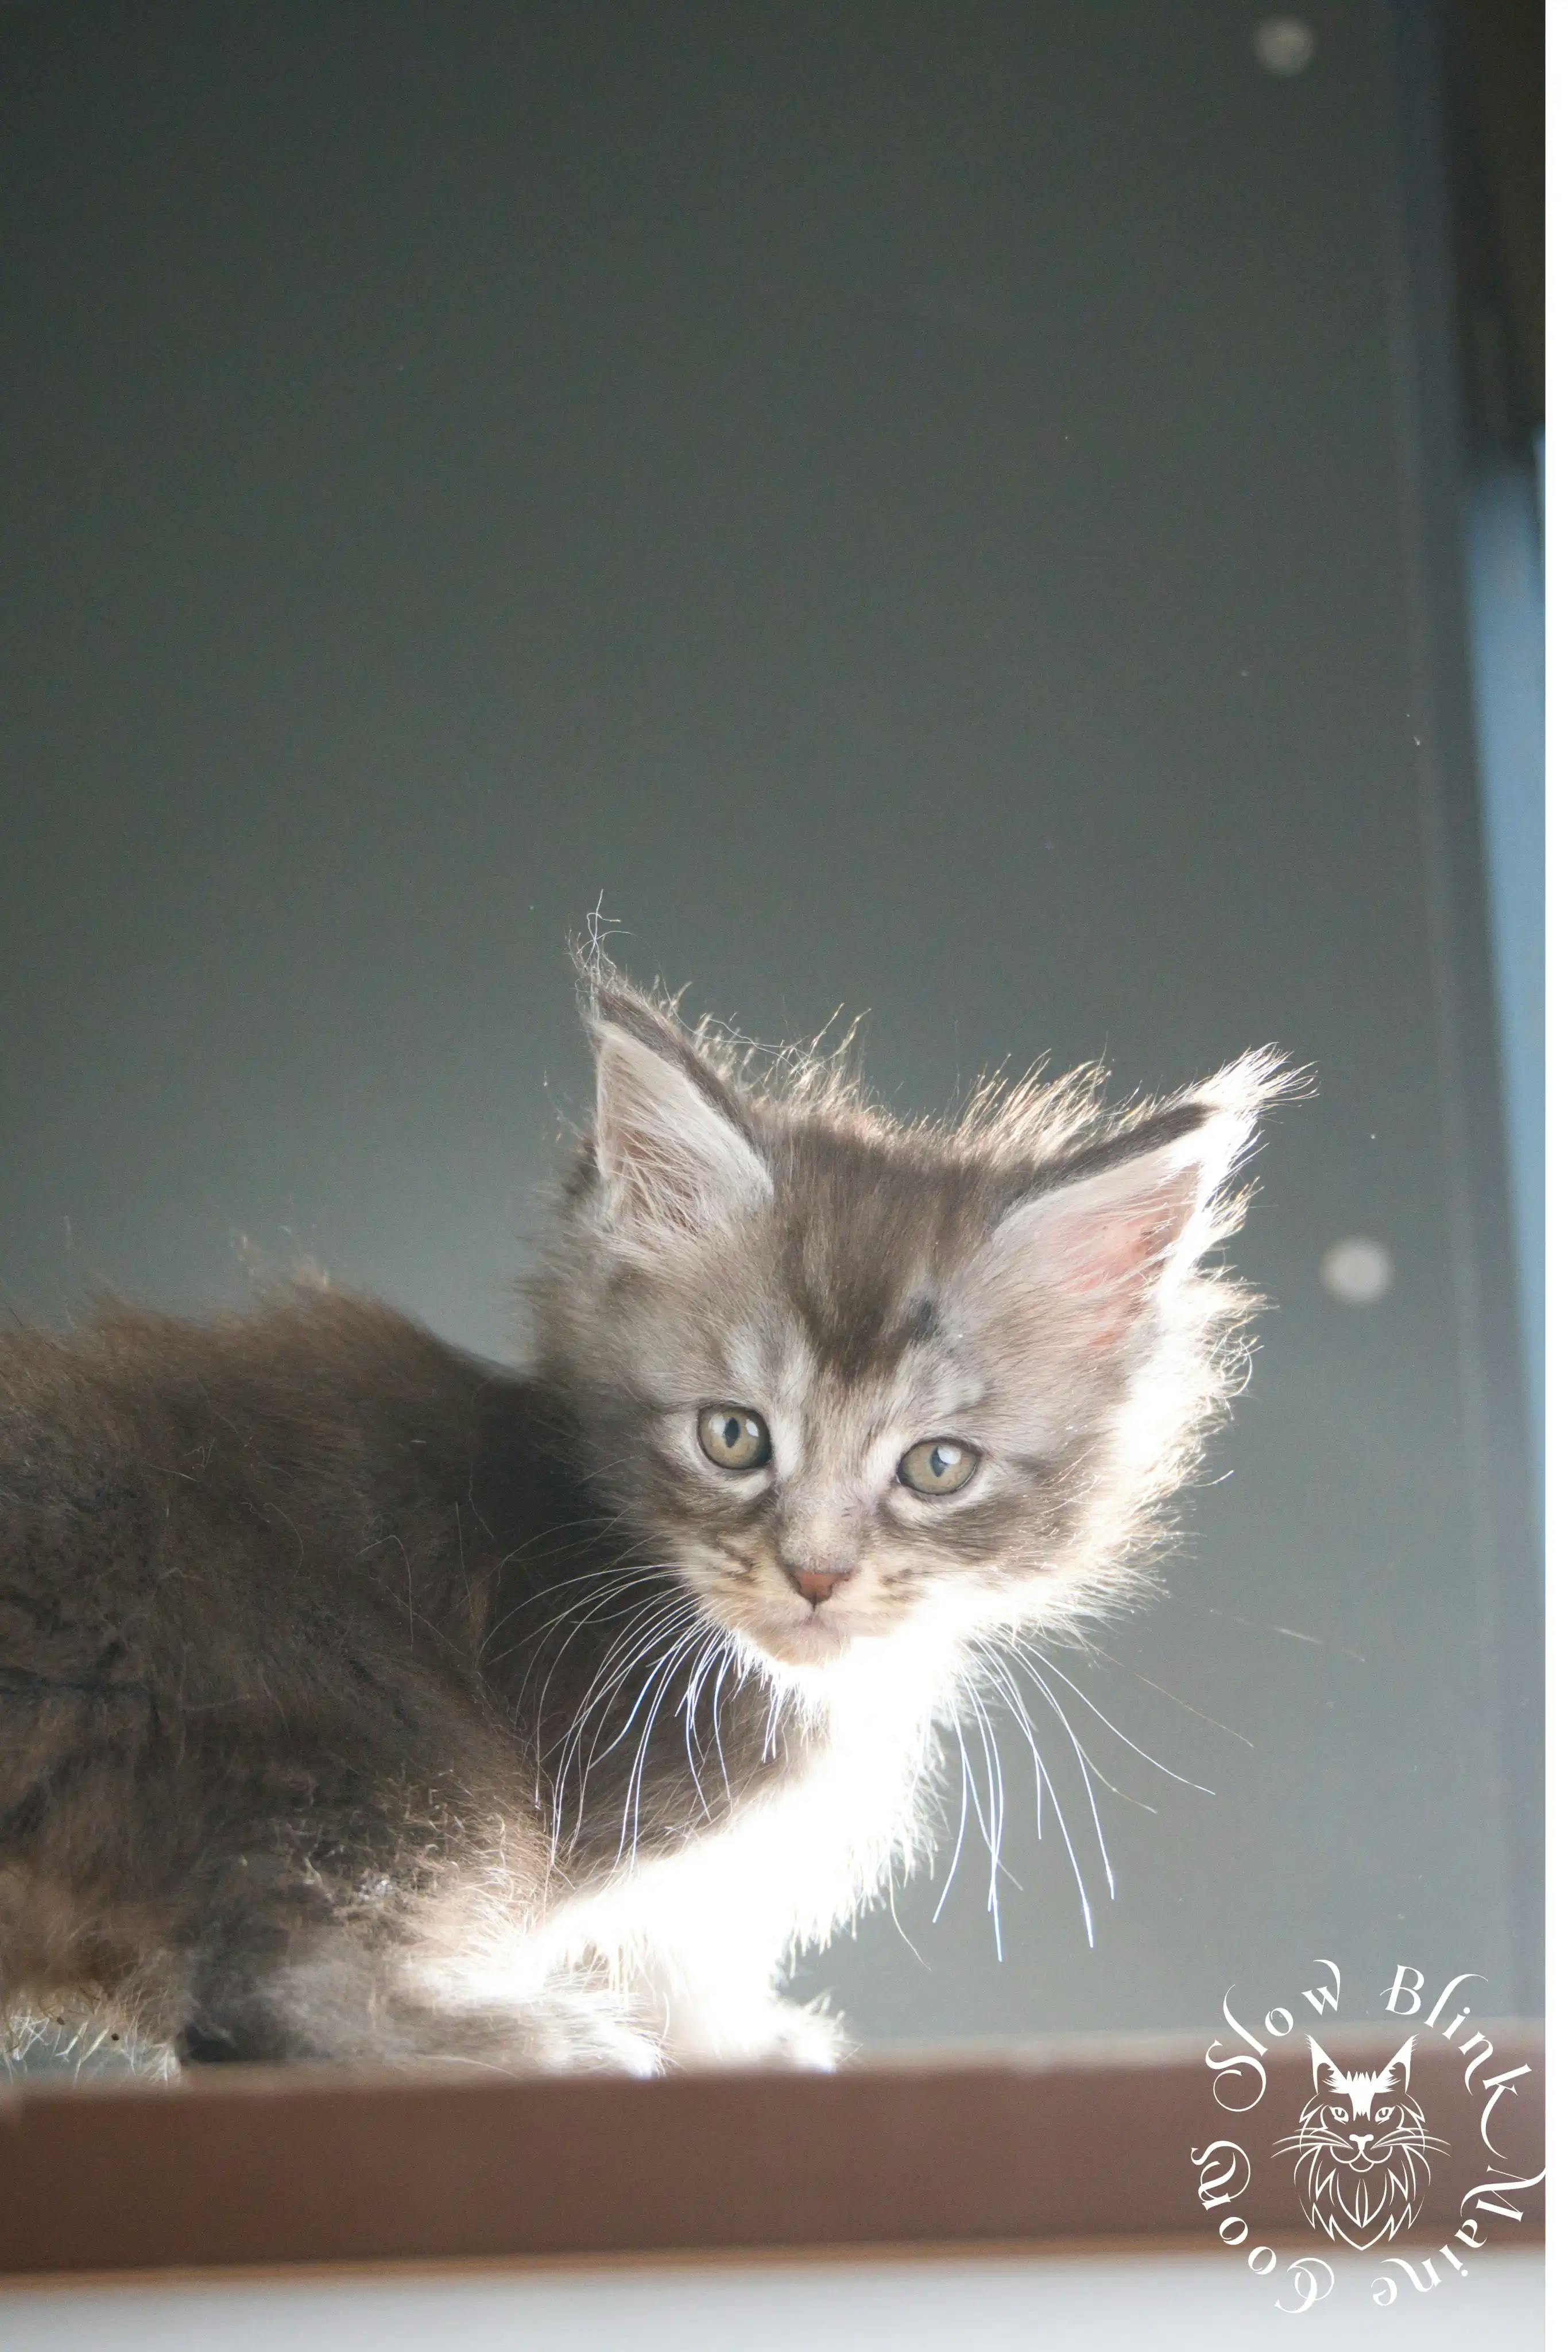 Blue Silver Tabby Maine Coon Kittens > blue silver tabby maine coon kitten | slowblinkmainecoons | 306